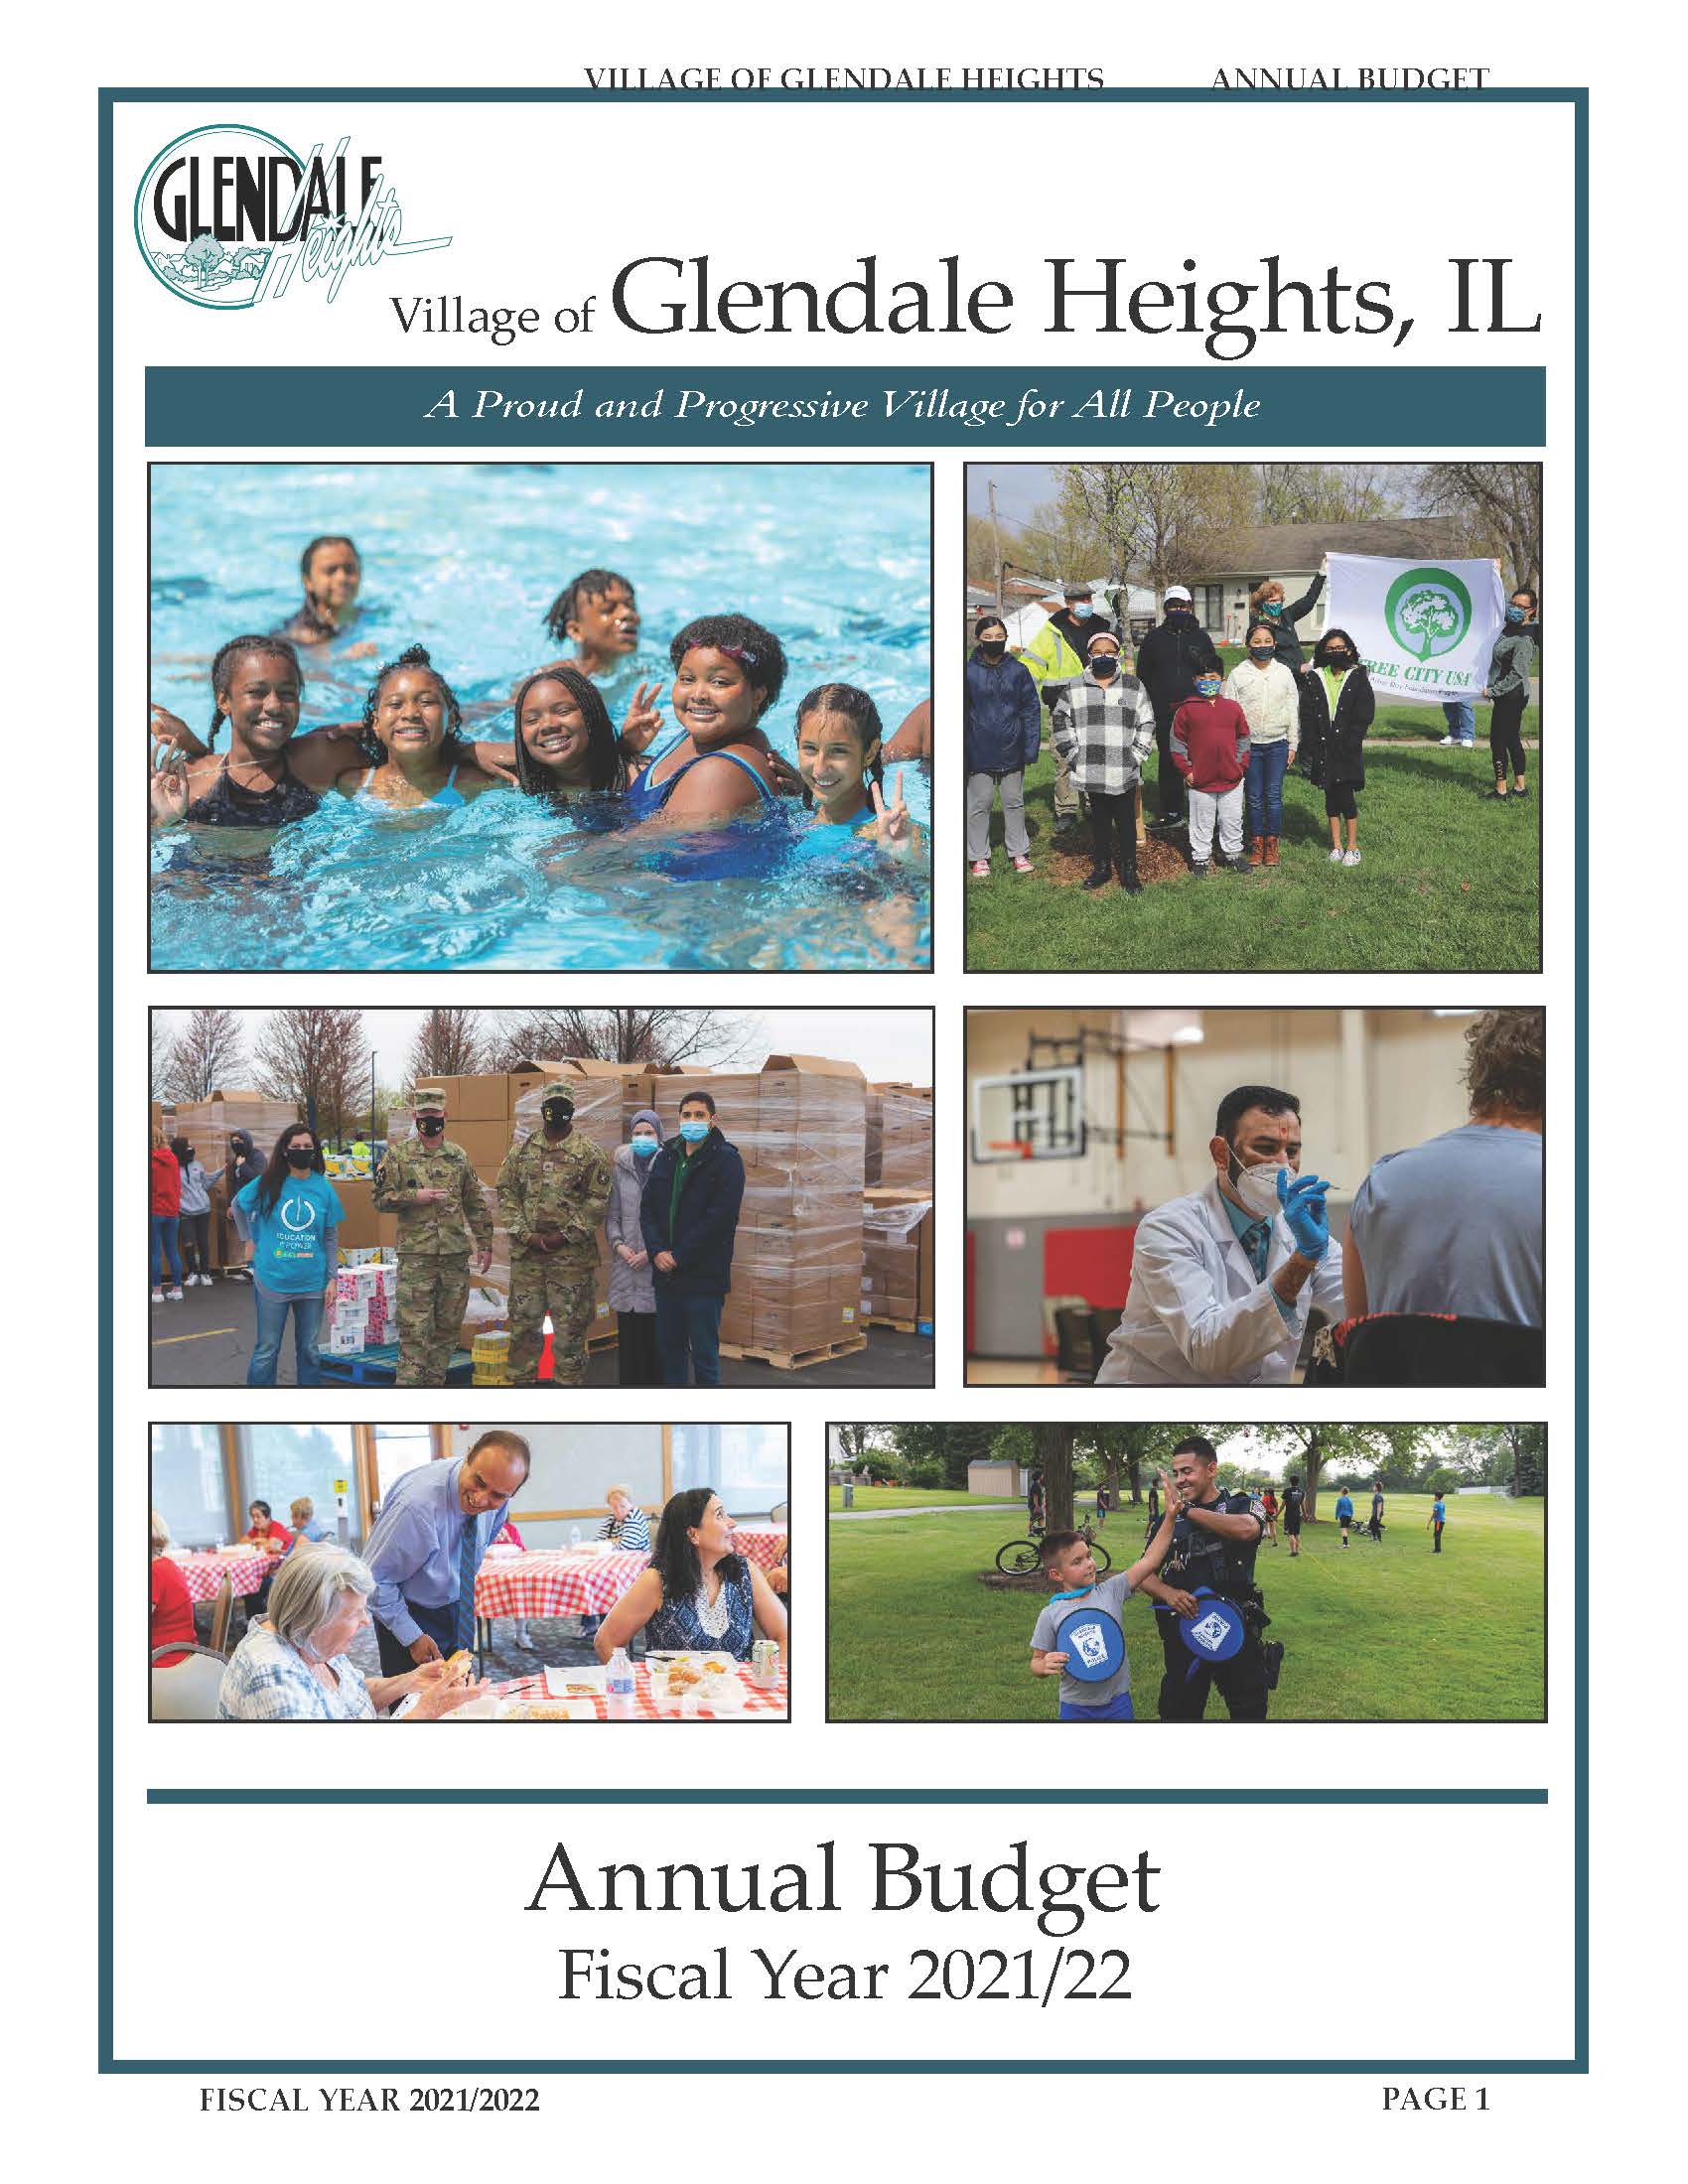 Fiscal Year 2021-2022 Annual Budget